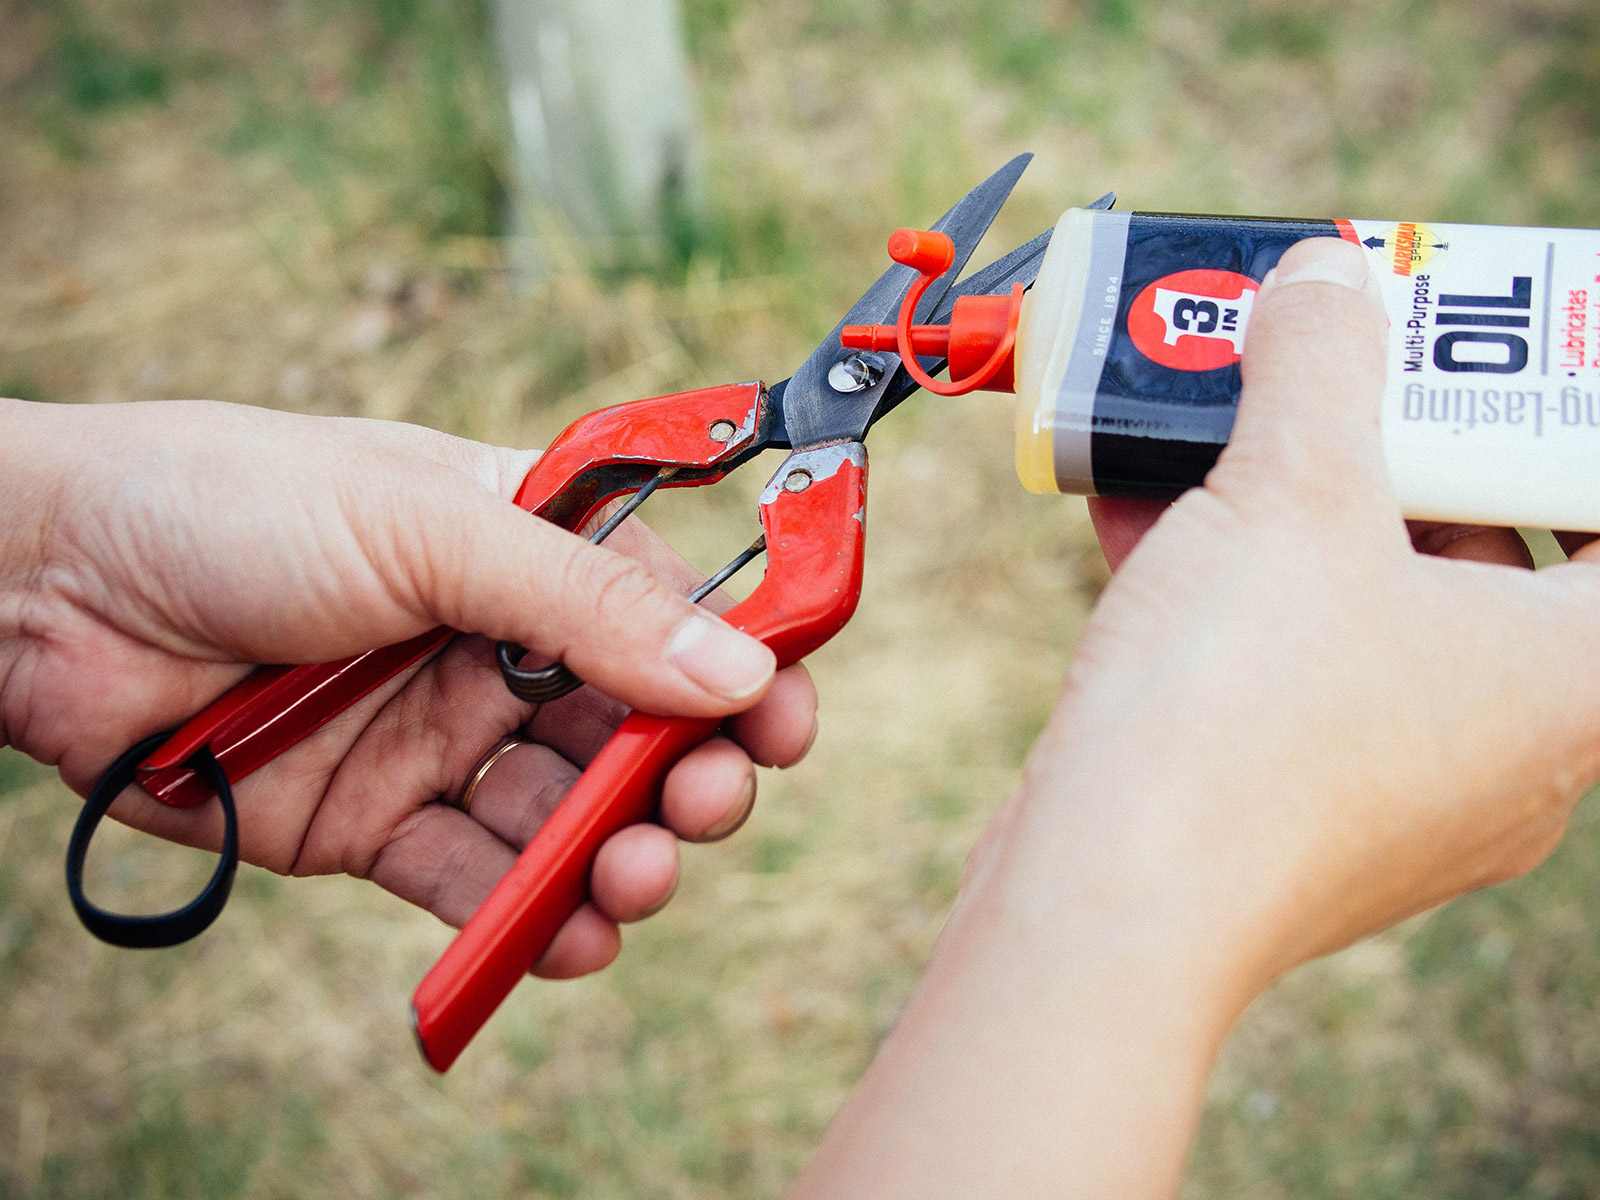 Woman applying a few drops of 3-IN-ONE Multi-Purpose Oil to the pivot joint of a pair of pruners